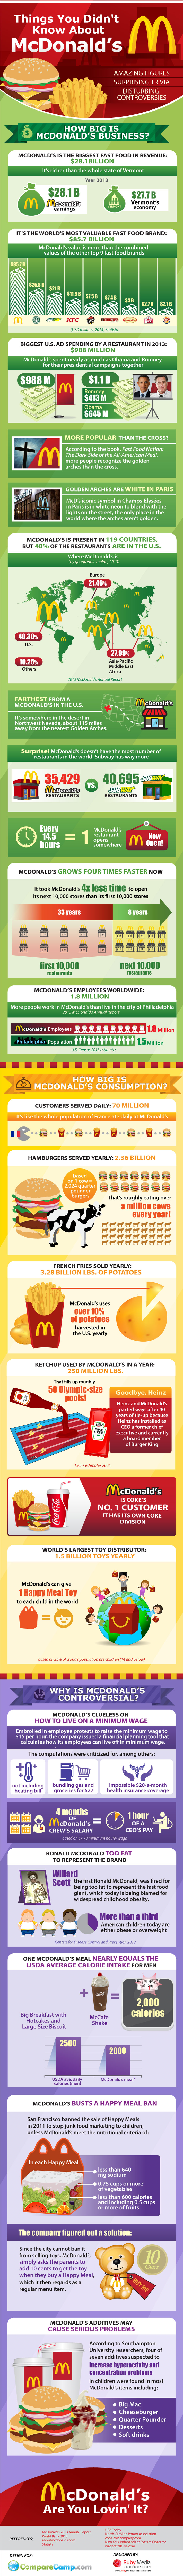 McDonald's Facts You Didn't Know About: Comparison Of Impressive Numbers & Shocking Controversies